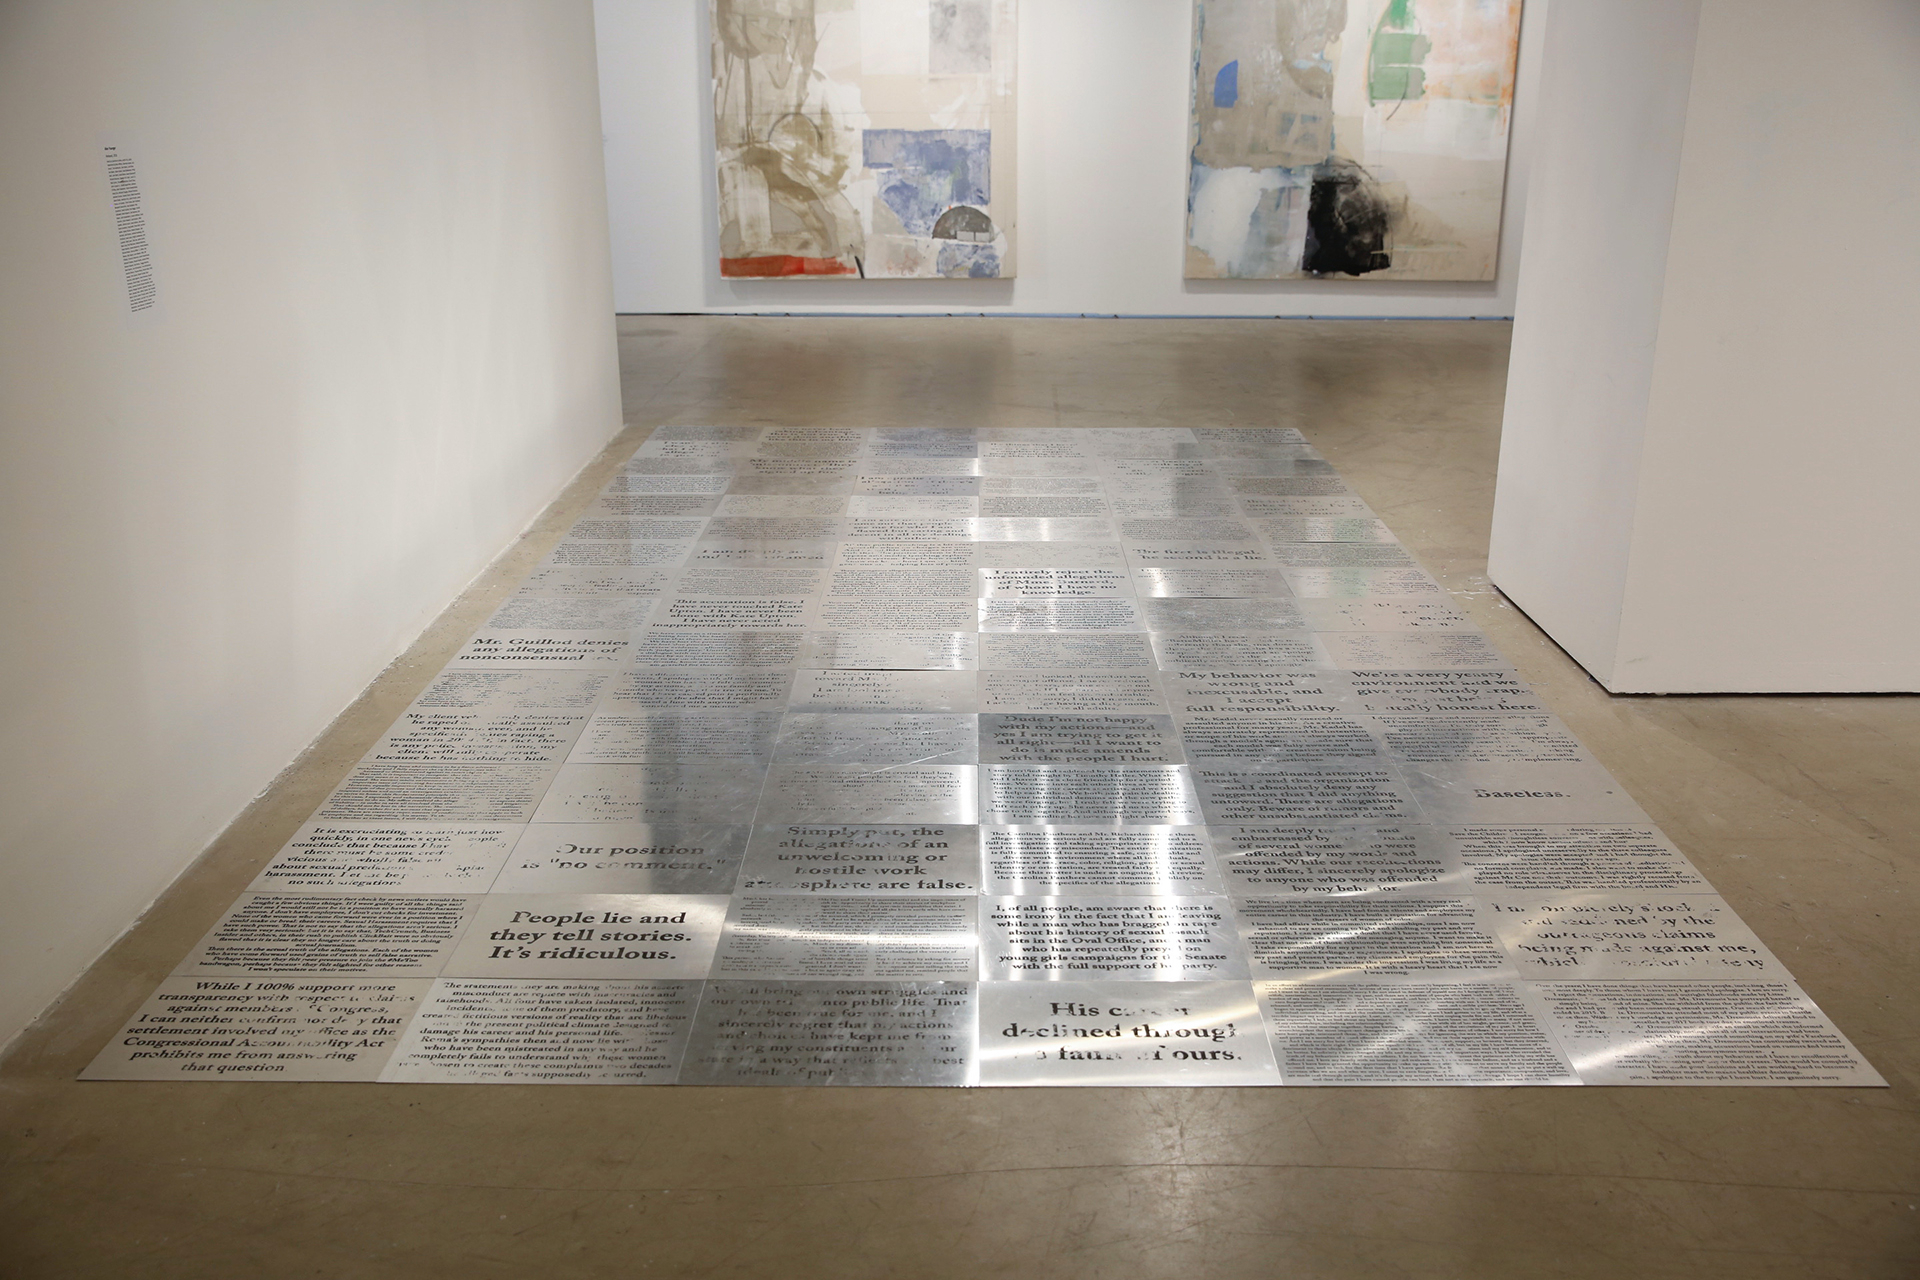 146 hand cut aluminum plates, screenprinted with the statements made by each public figure accused of sexual assault or harassment since Harvey Weinstein 96 plates shown displayed, erased through public interaction and maintained through performances to replace erased plates